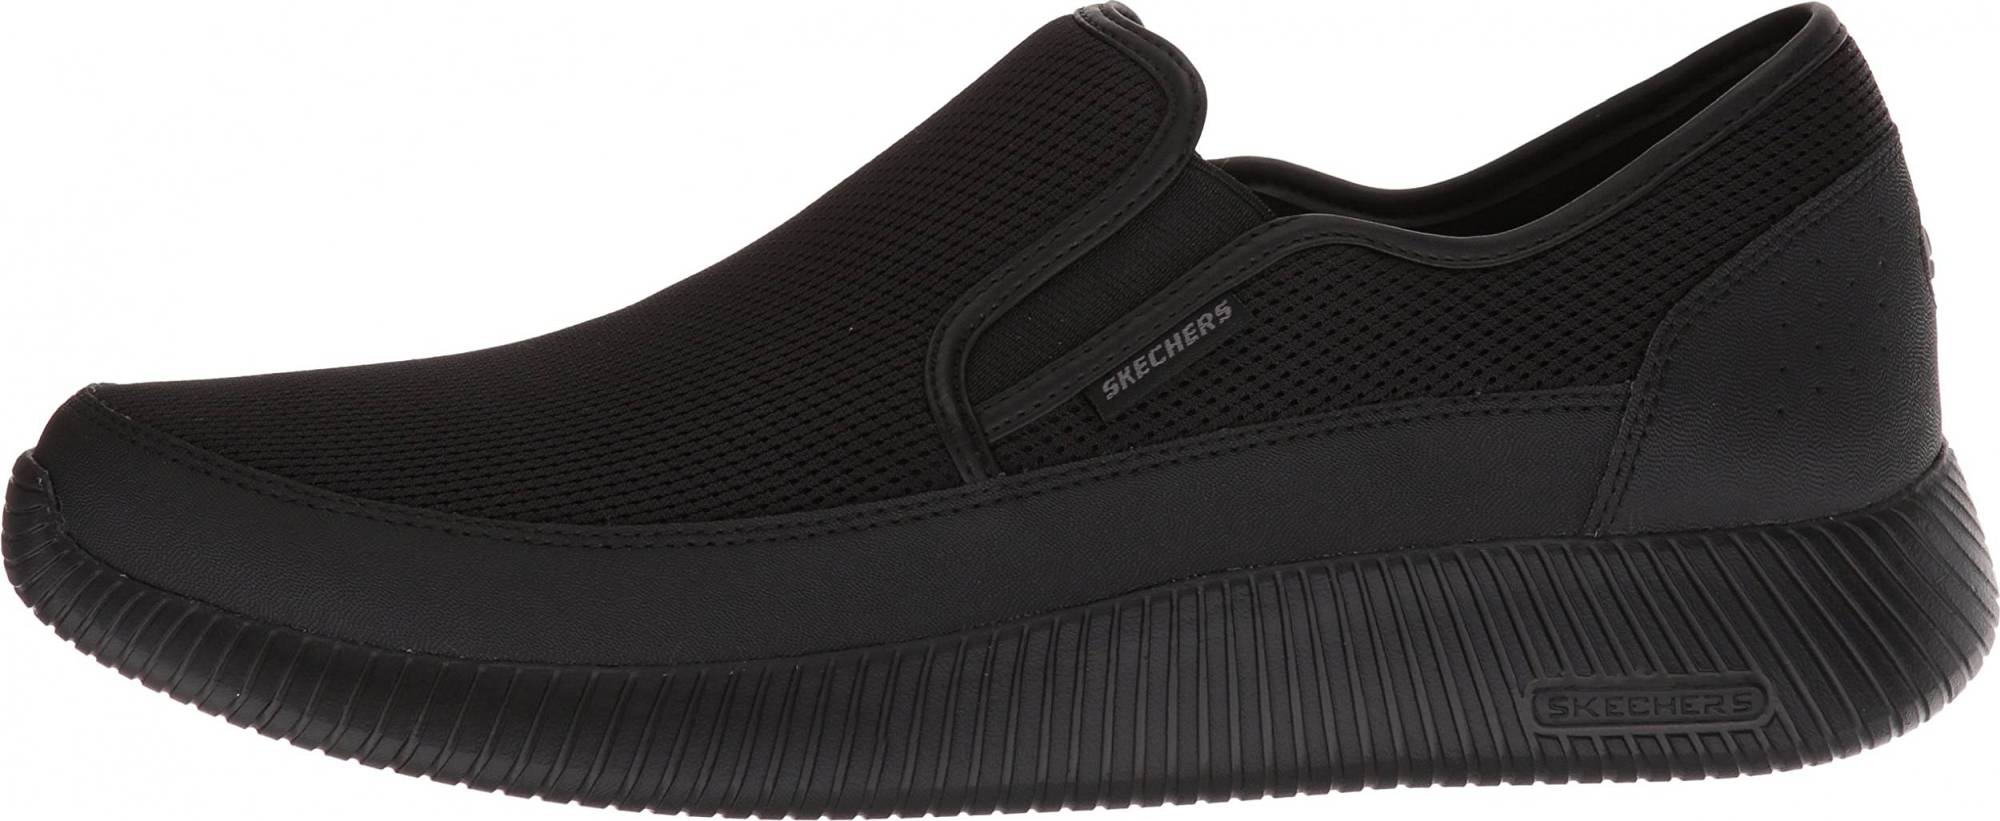 Skechers Depth Charge - Flish – Shoes Reviews & Reasons To Buy